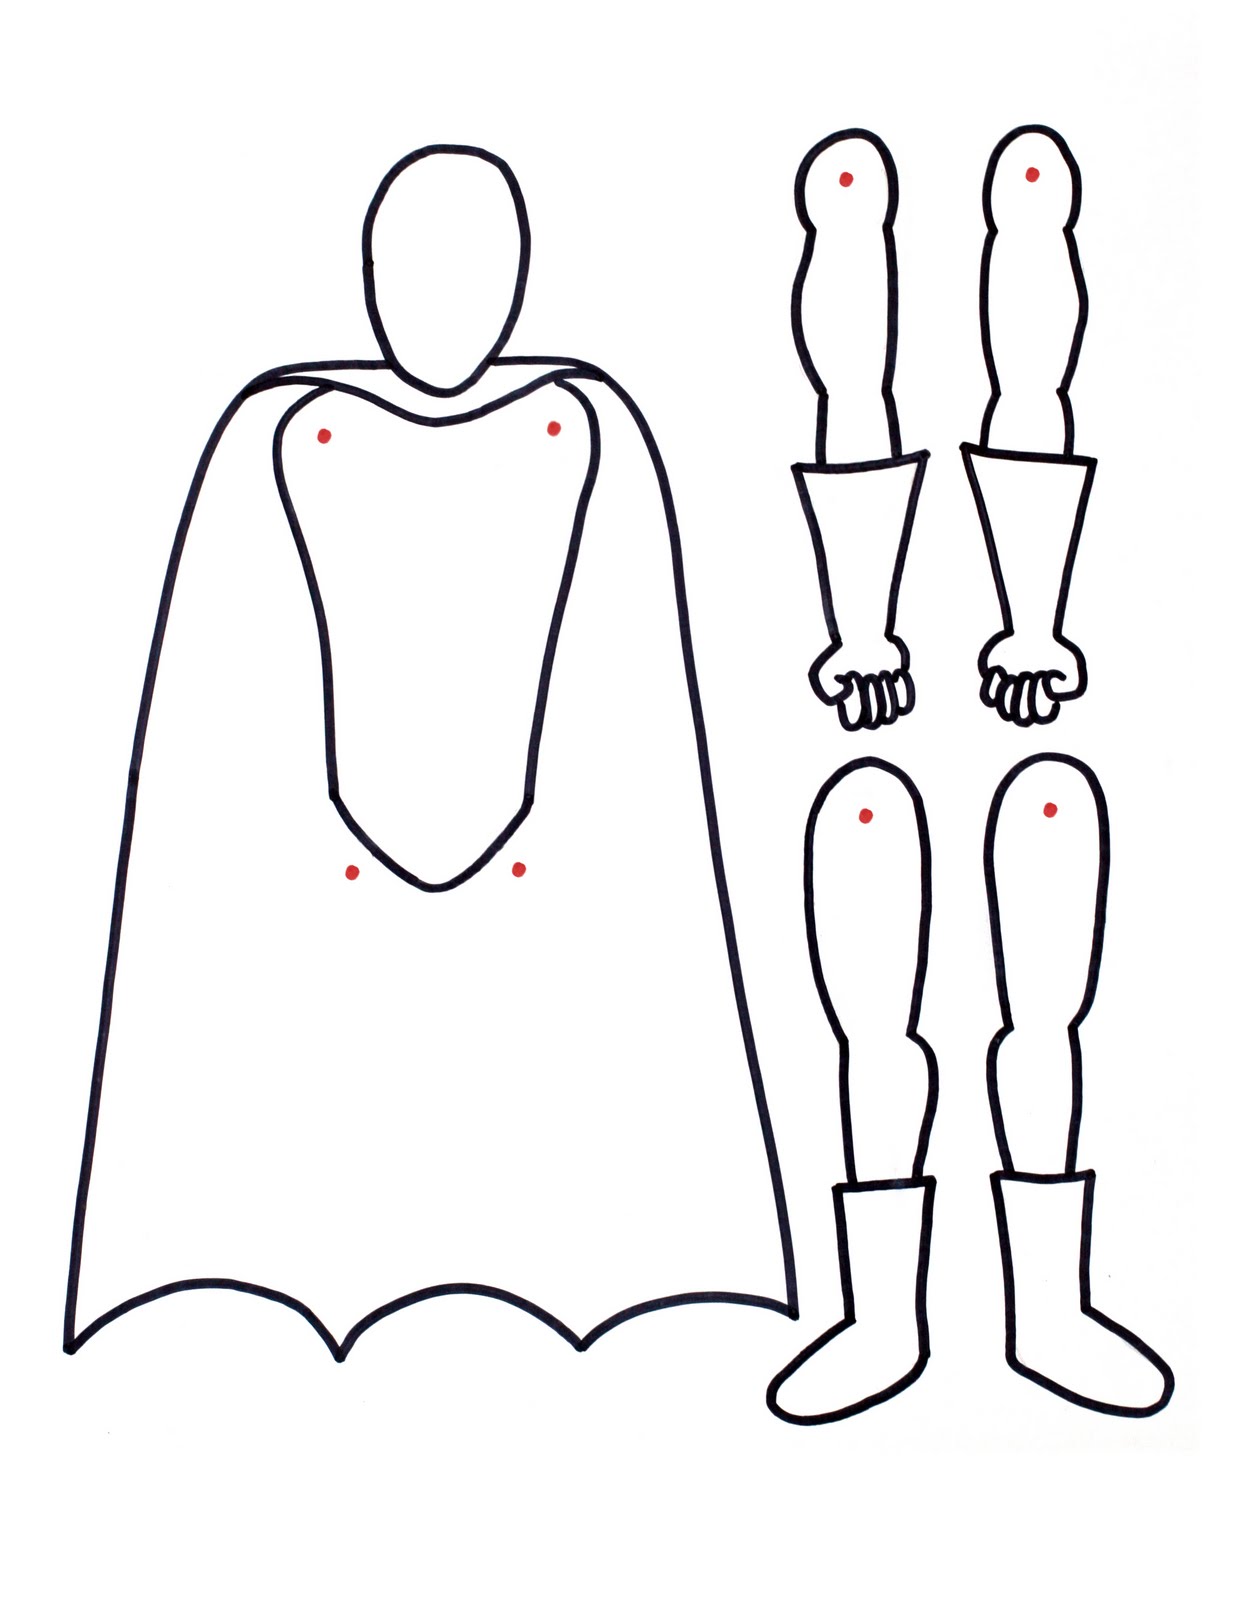 superhero-body-outline-coloring-coloring-pages